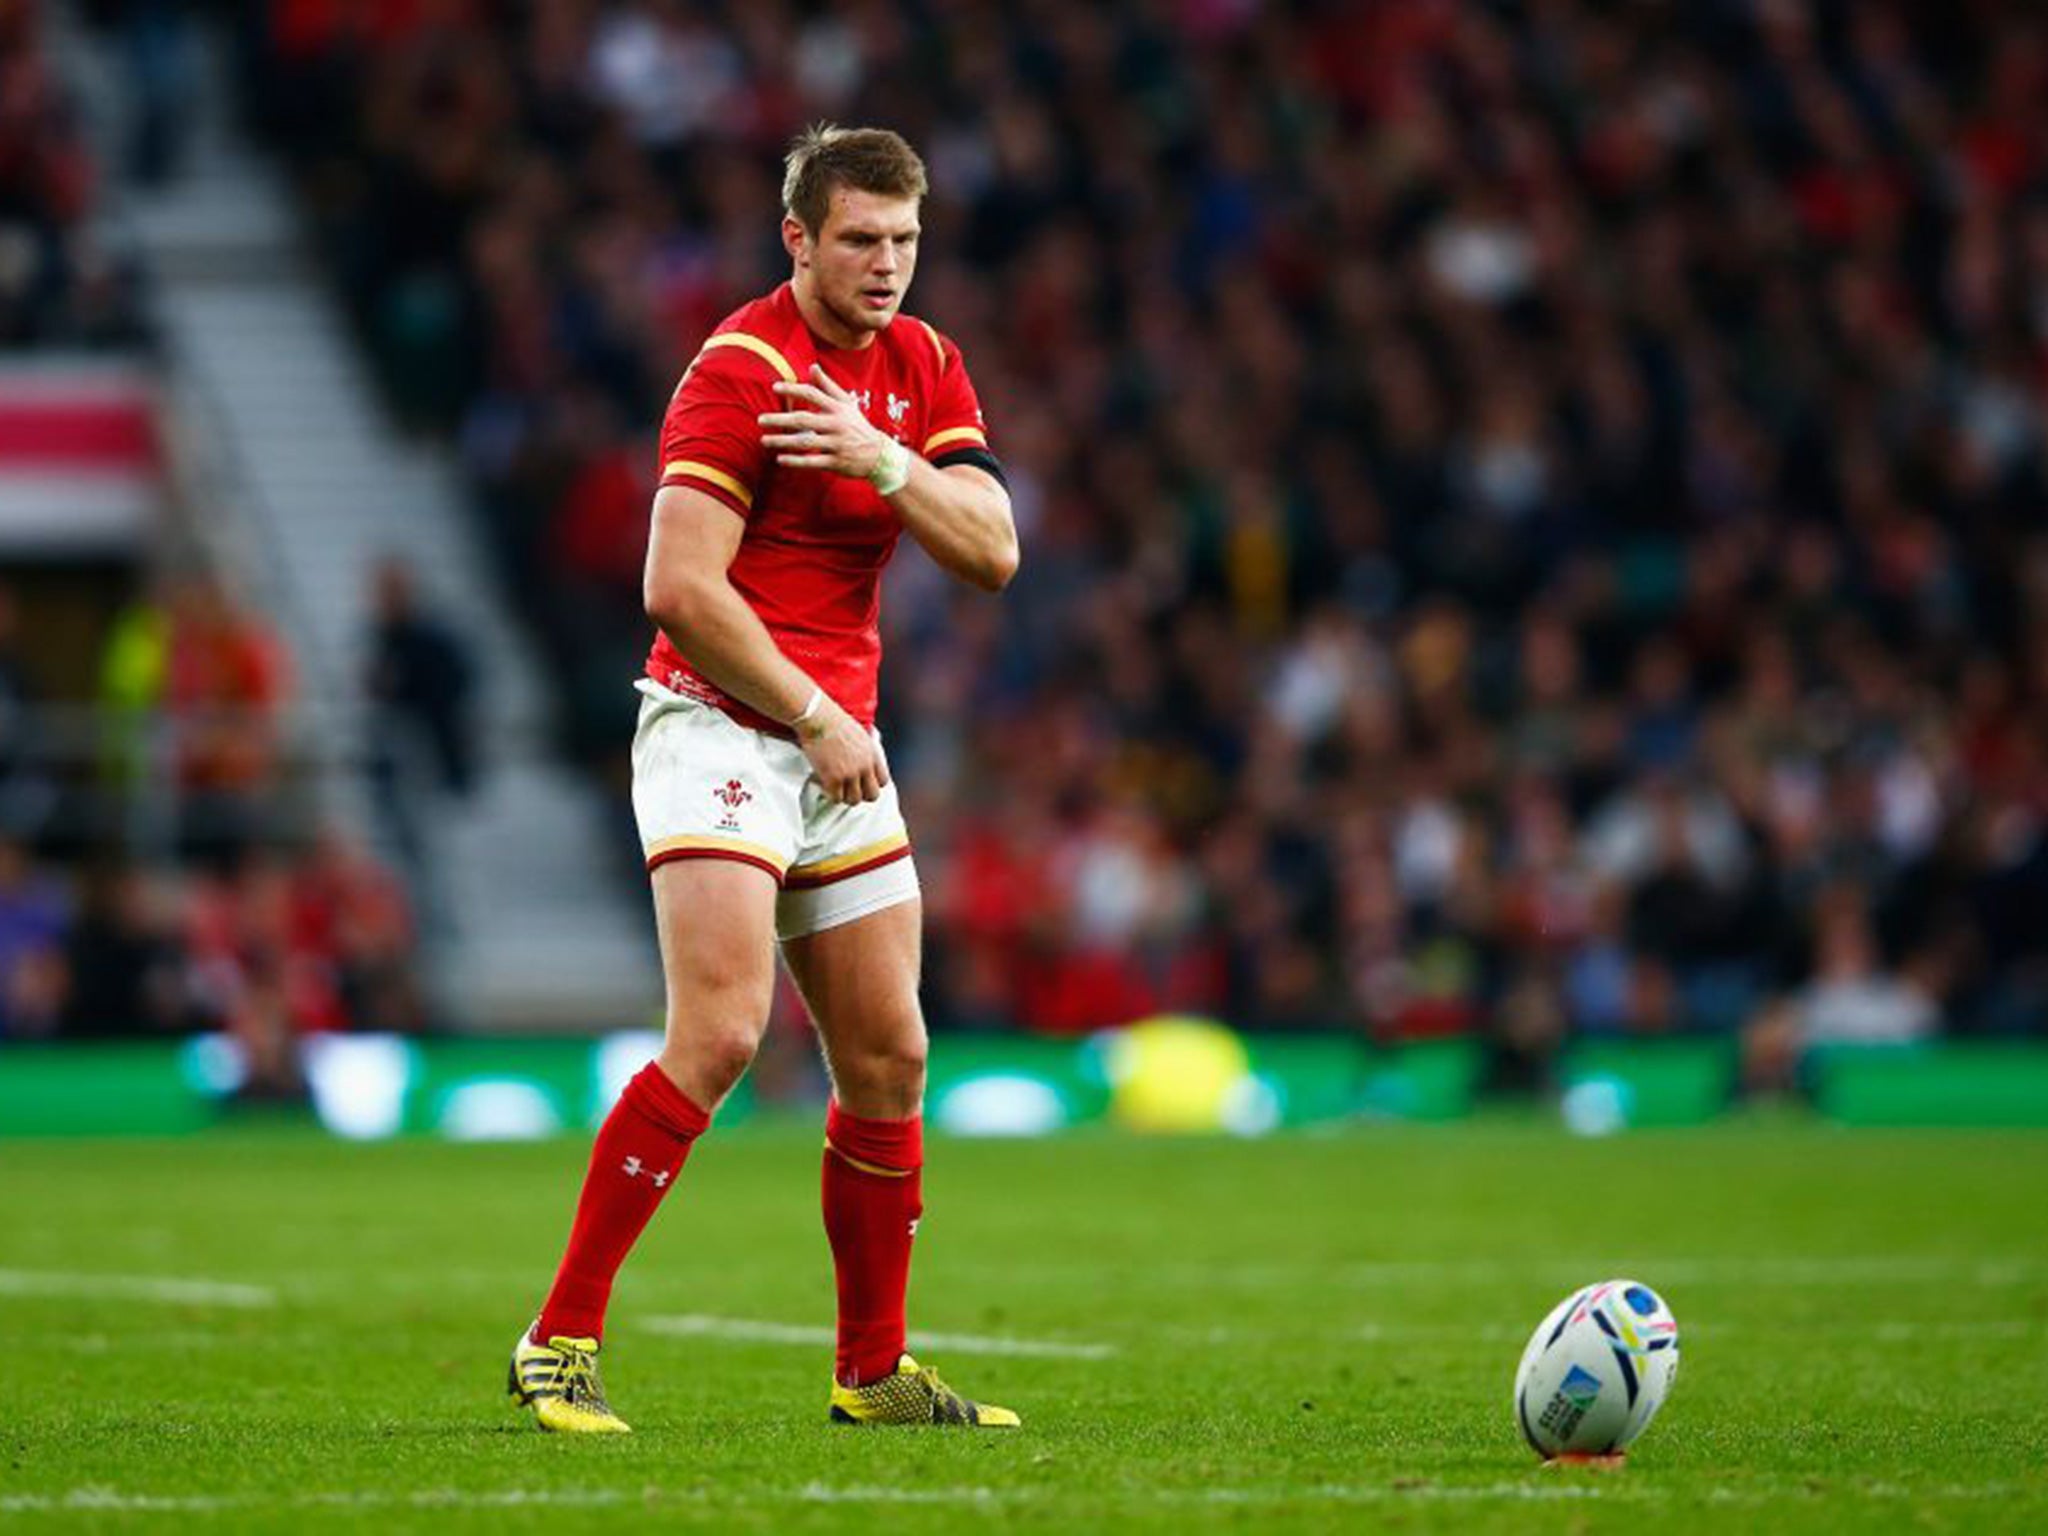 Dan Biggar goes through his unique pre-kick ritual before another three-pointer for Wales